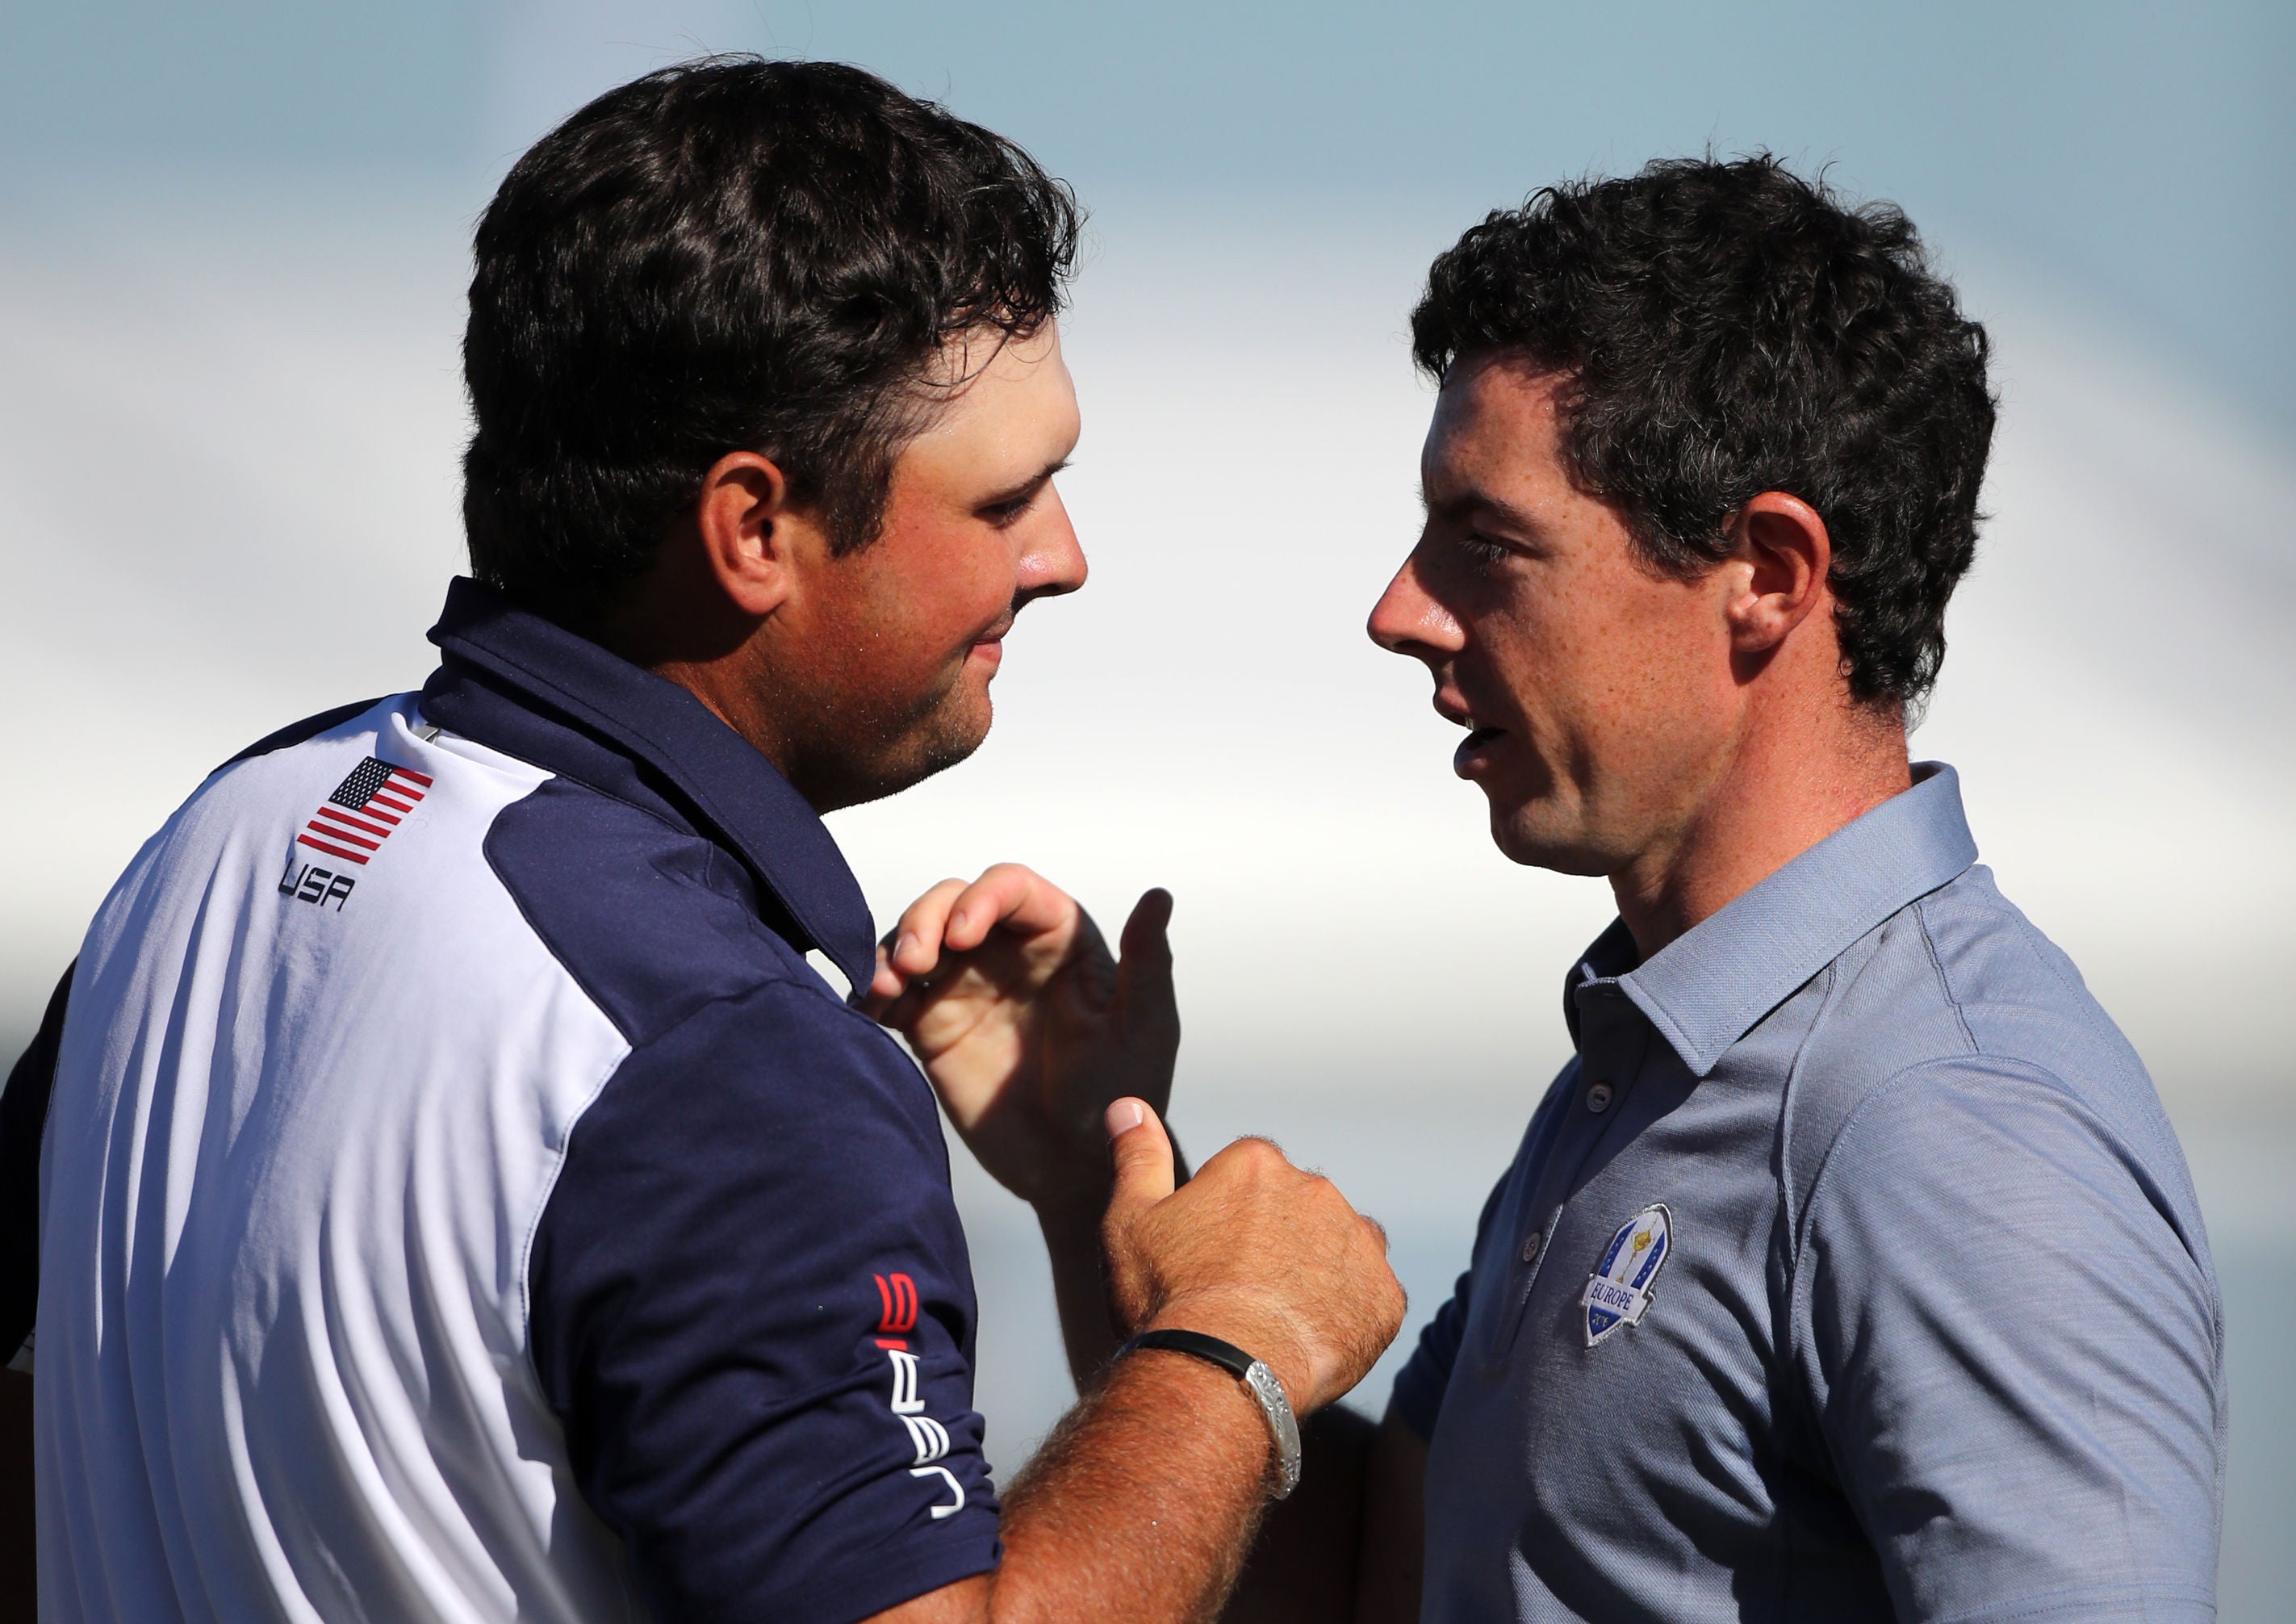 Patrick Reed and Rory McIlroy shake hands after their singles match at Hazeltine (Peter Byrne/PA)